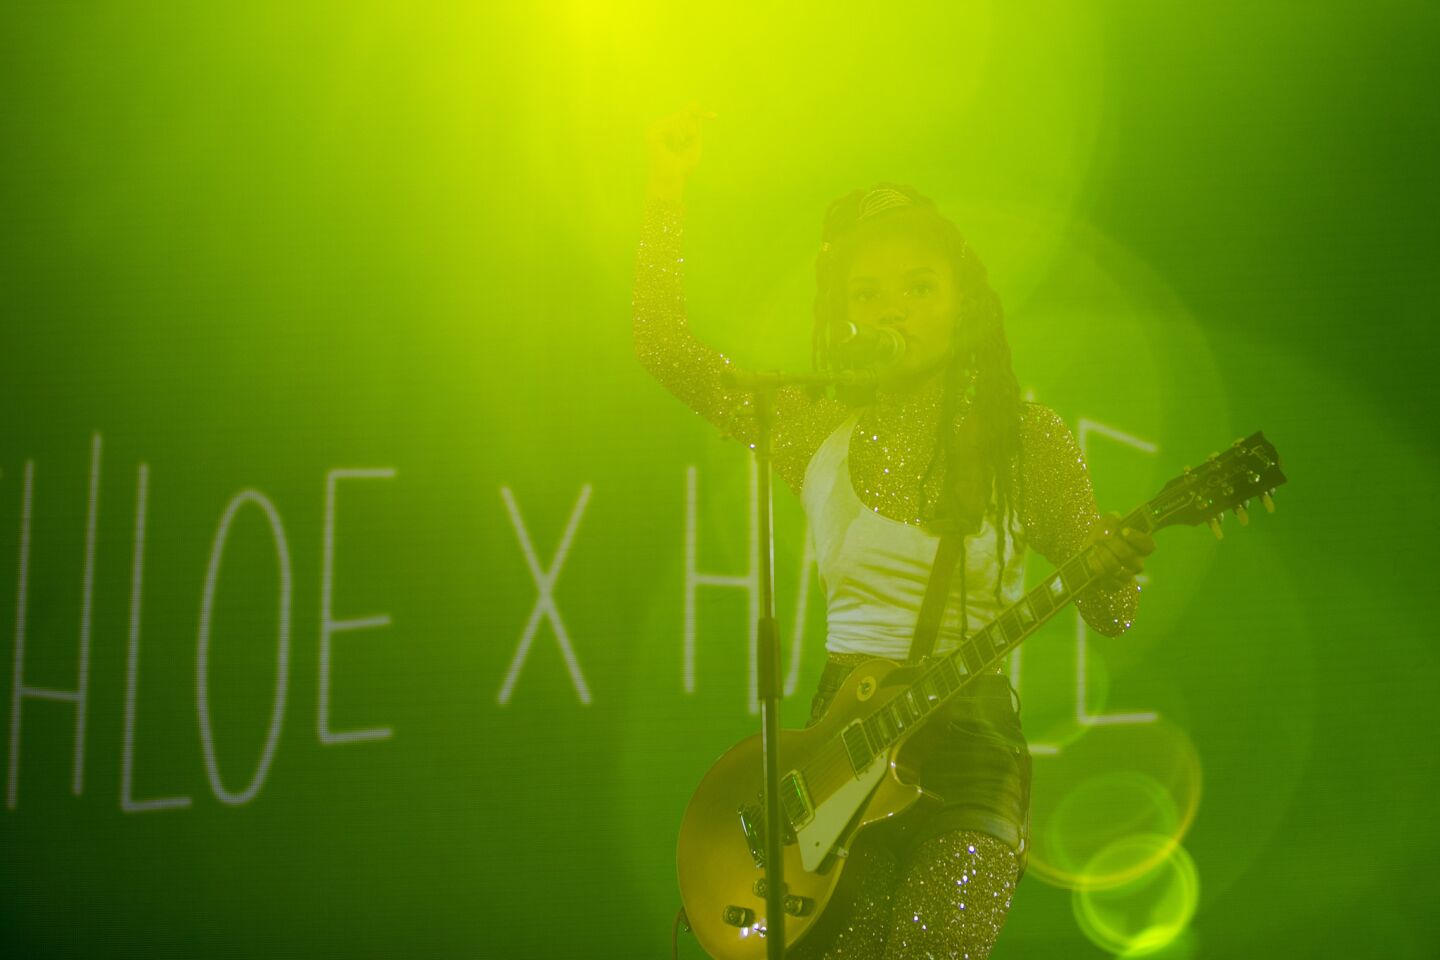 Halle Bailey of Chloe x Halle performs during Day 2 of the Coachella Valley Arts and Music Festival at the Empire Polo Grounds on April 14.